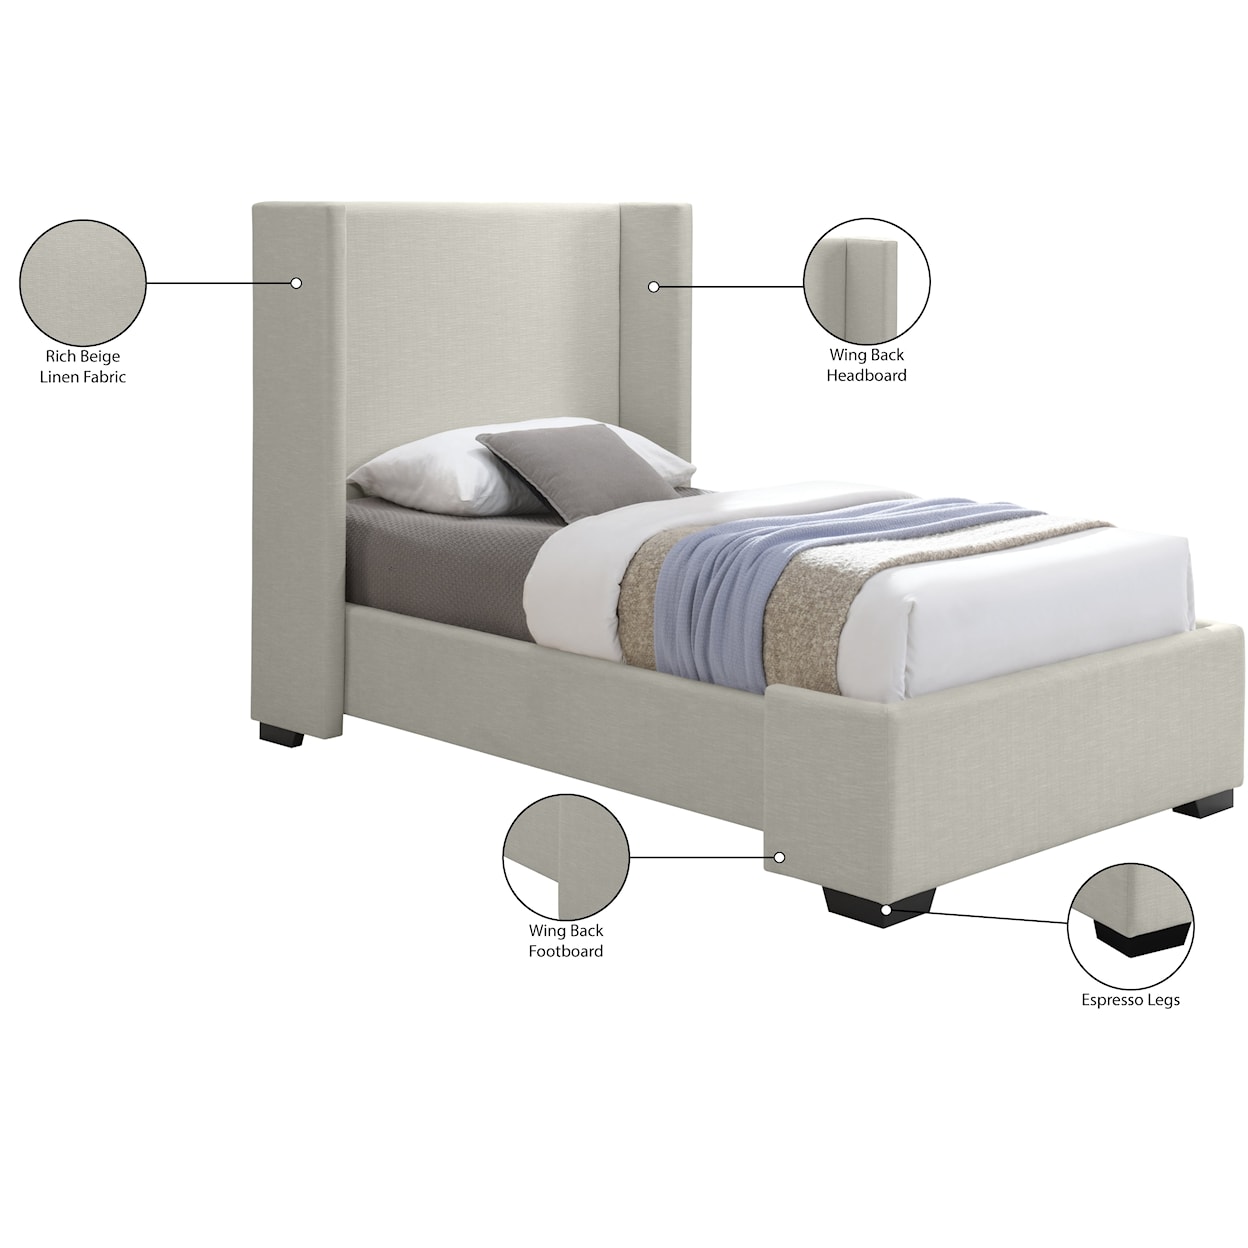 Meridian Furniture Oxford Twin Bed (3 Boxes)